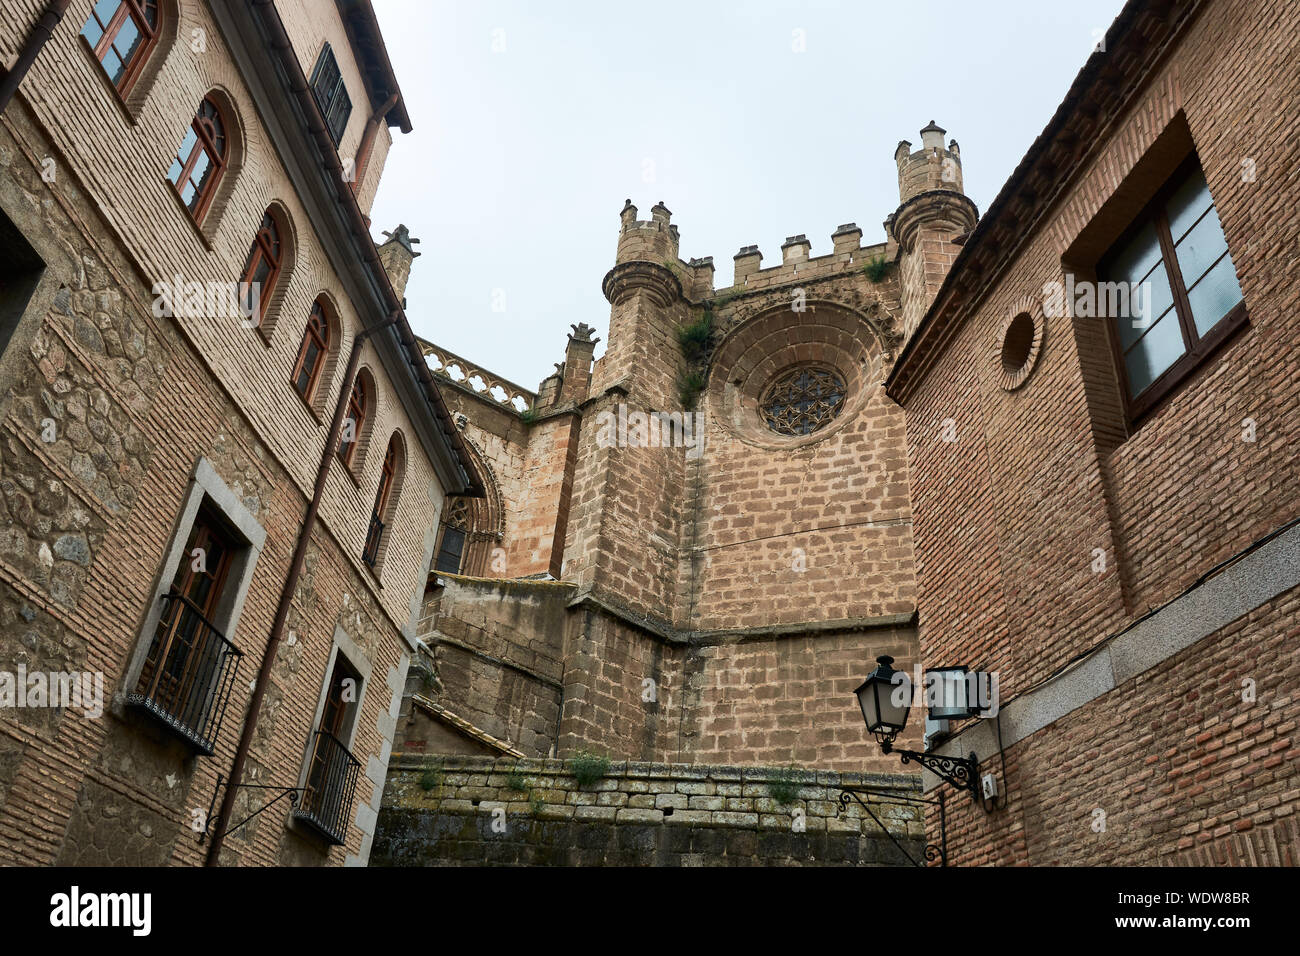 TOLEDO, SPAIN - APRIL 24, 2018: One of the sides of the Primate Cathedral of Saint Mary of Toledo. Stock Photo